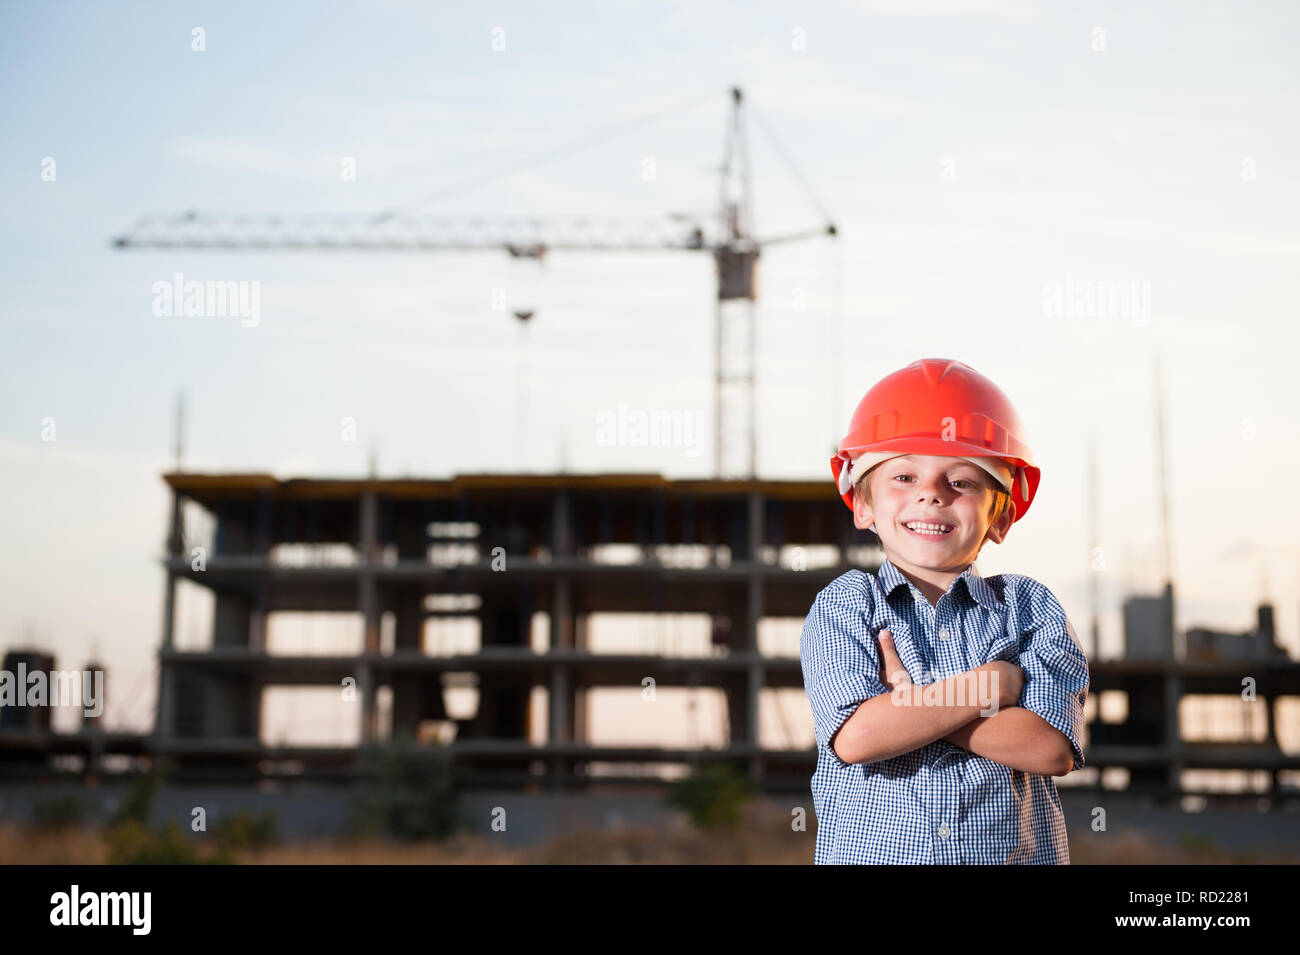 handsome happy smiling little kid in orange helmet and blue shirt standing on construction site with crane Stock Photo